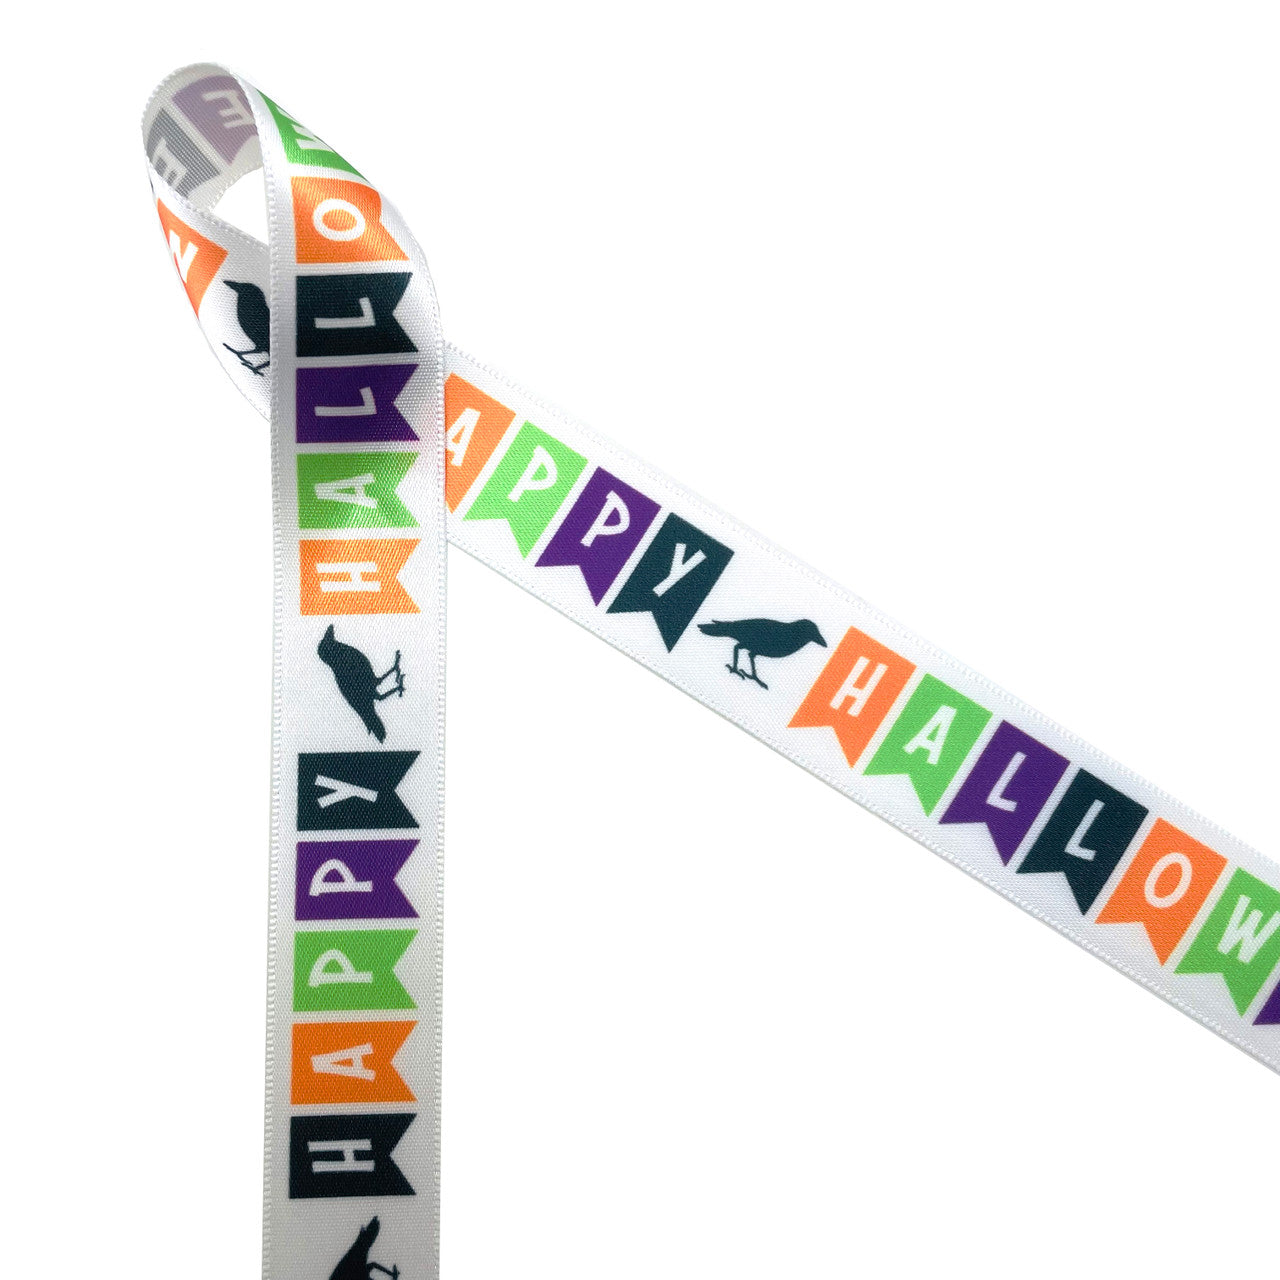 Happy Halloween banner ribbon with banners of orange, purple, lime green and black wit a black raven printed on 5/8" white single face satin is ideal for so many Halloween events. This is a great ribbon for gift wrap, gift baskets, cookies, cake pops, candy shops and chocolatiers. This is an ideal ribbon for party decor, party favors, crafts, bows, scrap booking and quilting projects. All our ribbon is designed and printed in the USA